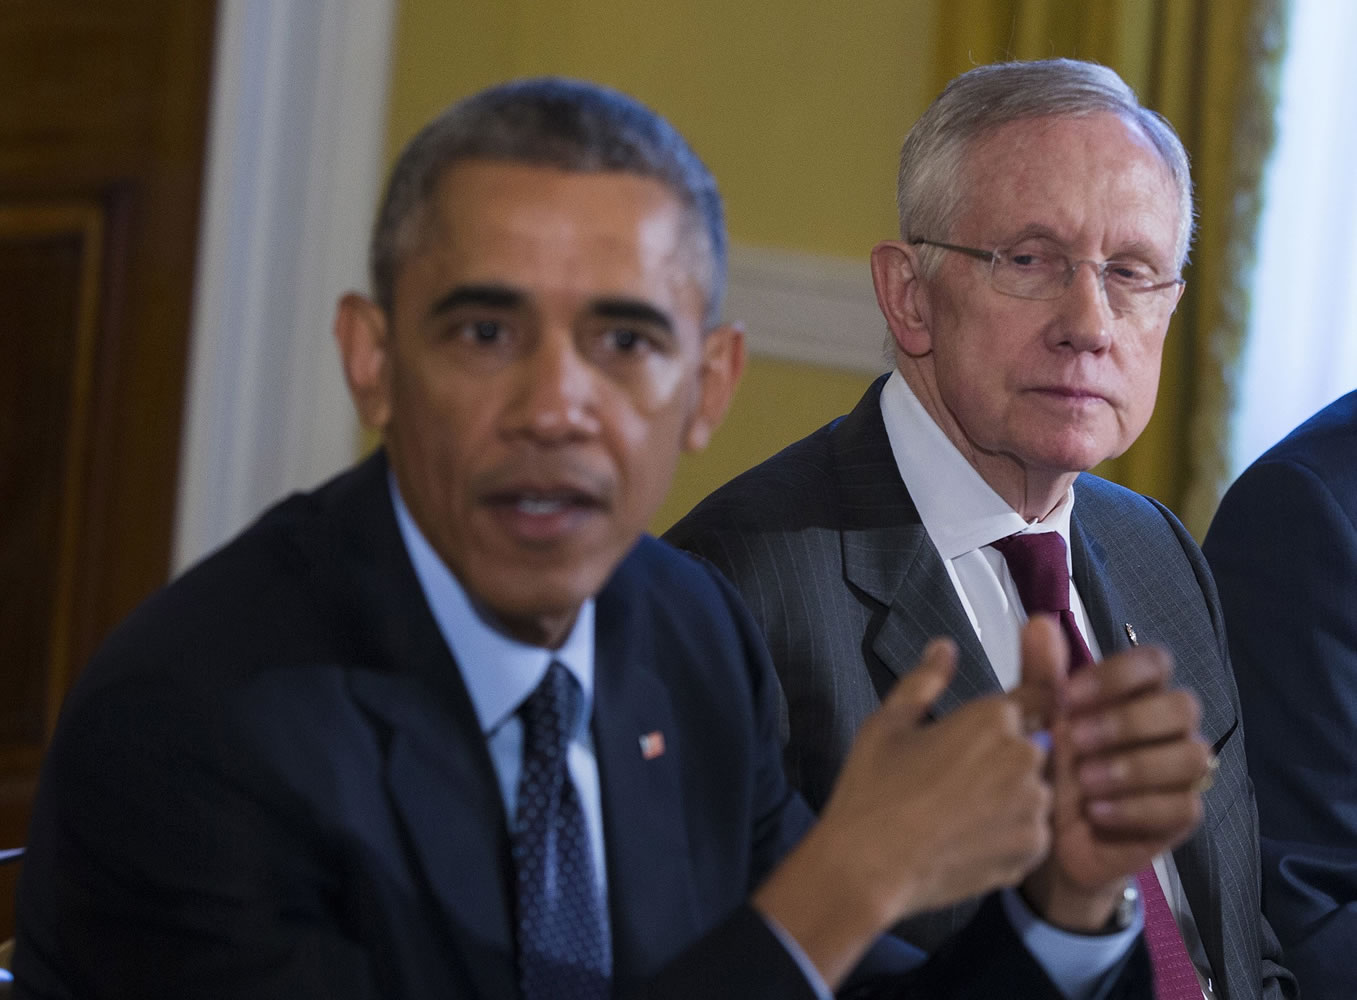 Senate Majority Leader Harry Reid of Nev., right, listens as President Barack Obama speaks during a meeting Nov. 7, 2014, with Congressional leaders in the Old Family Dining Room of the White House in Washington. Reid is announcing he will not seek re-election to another term.